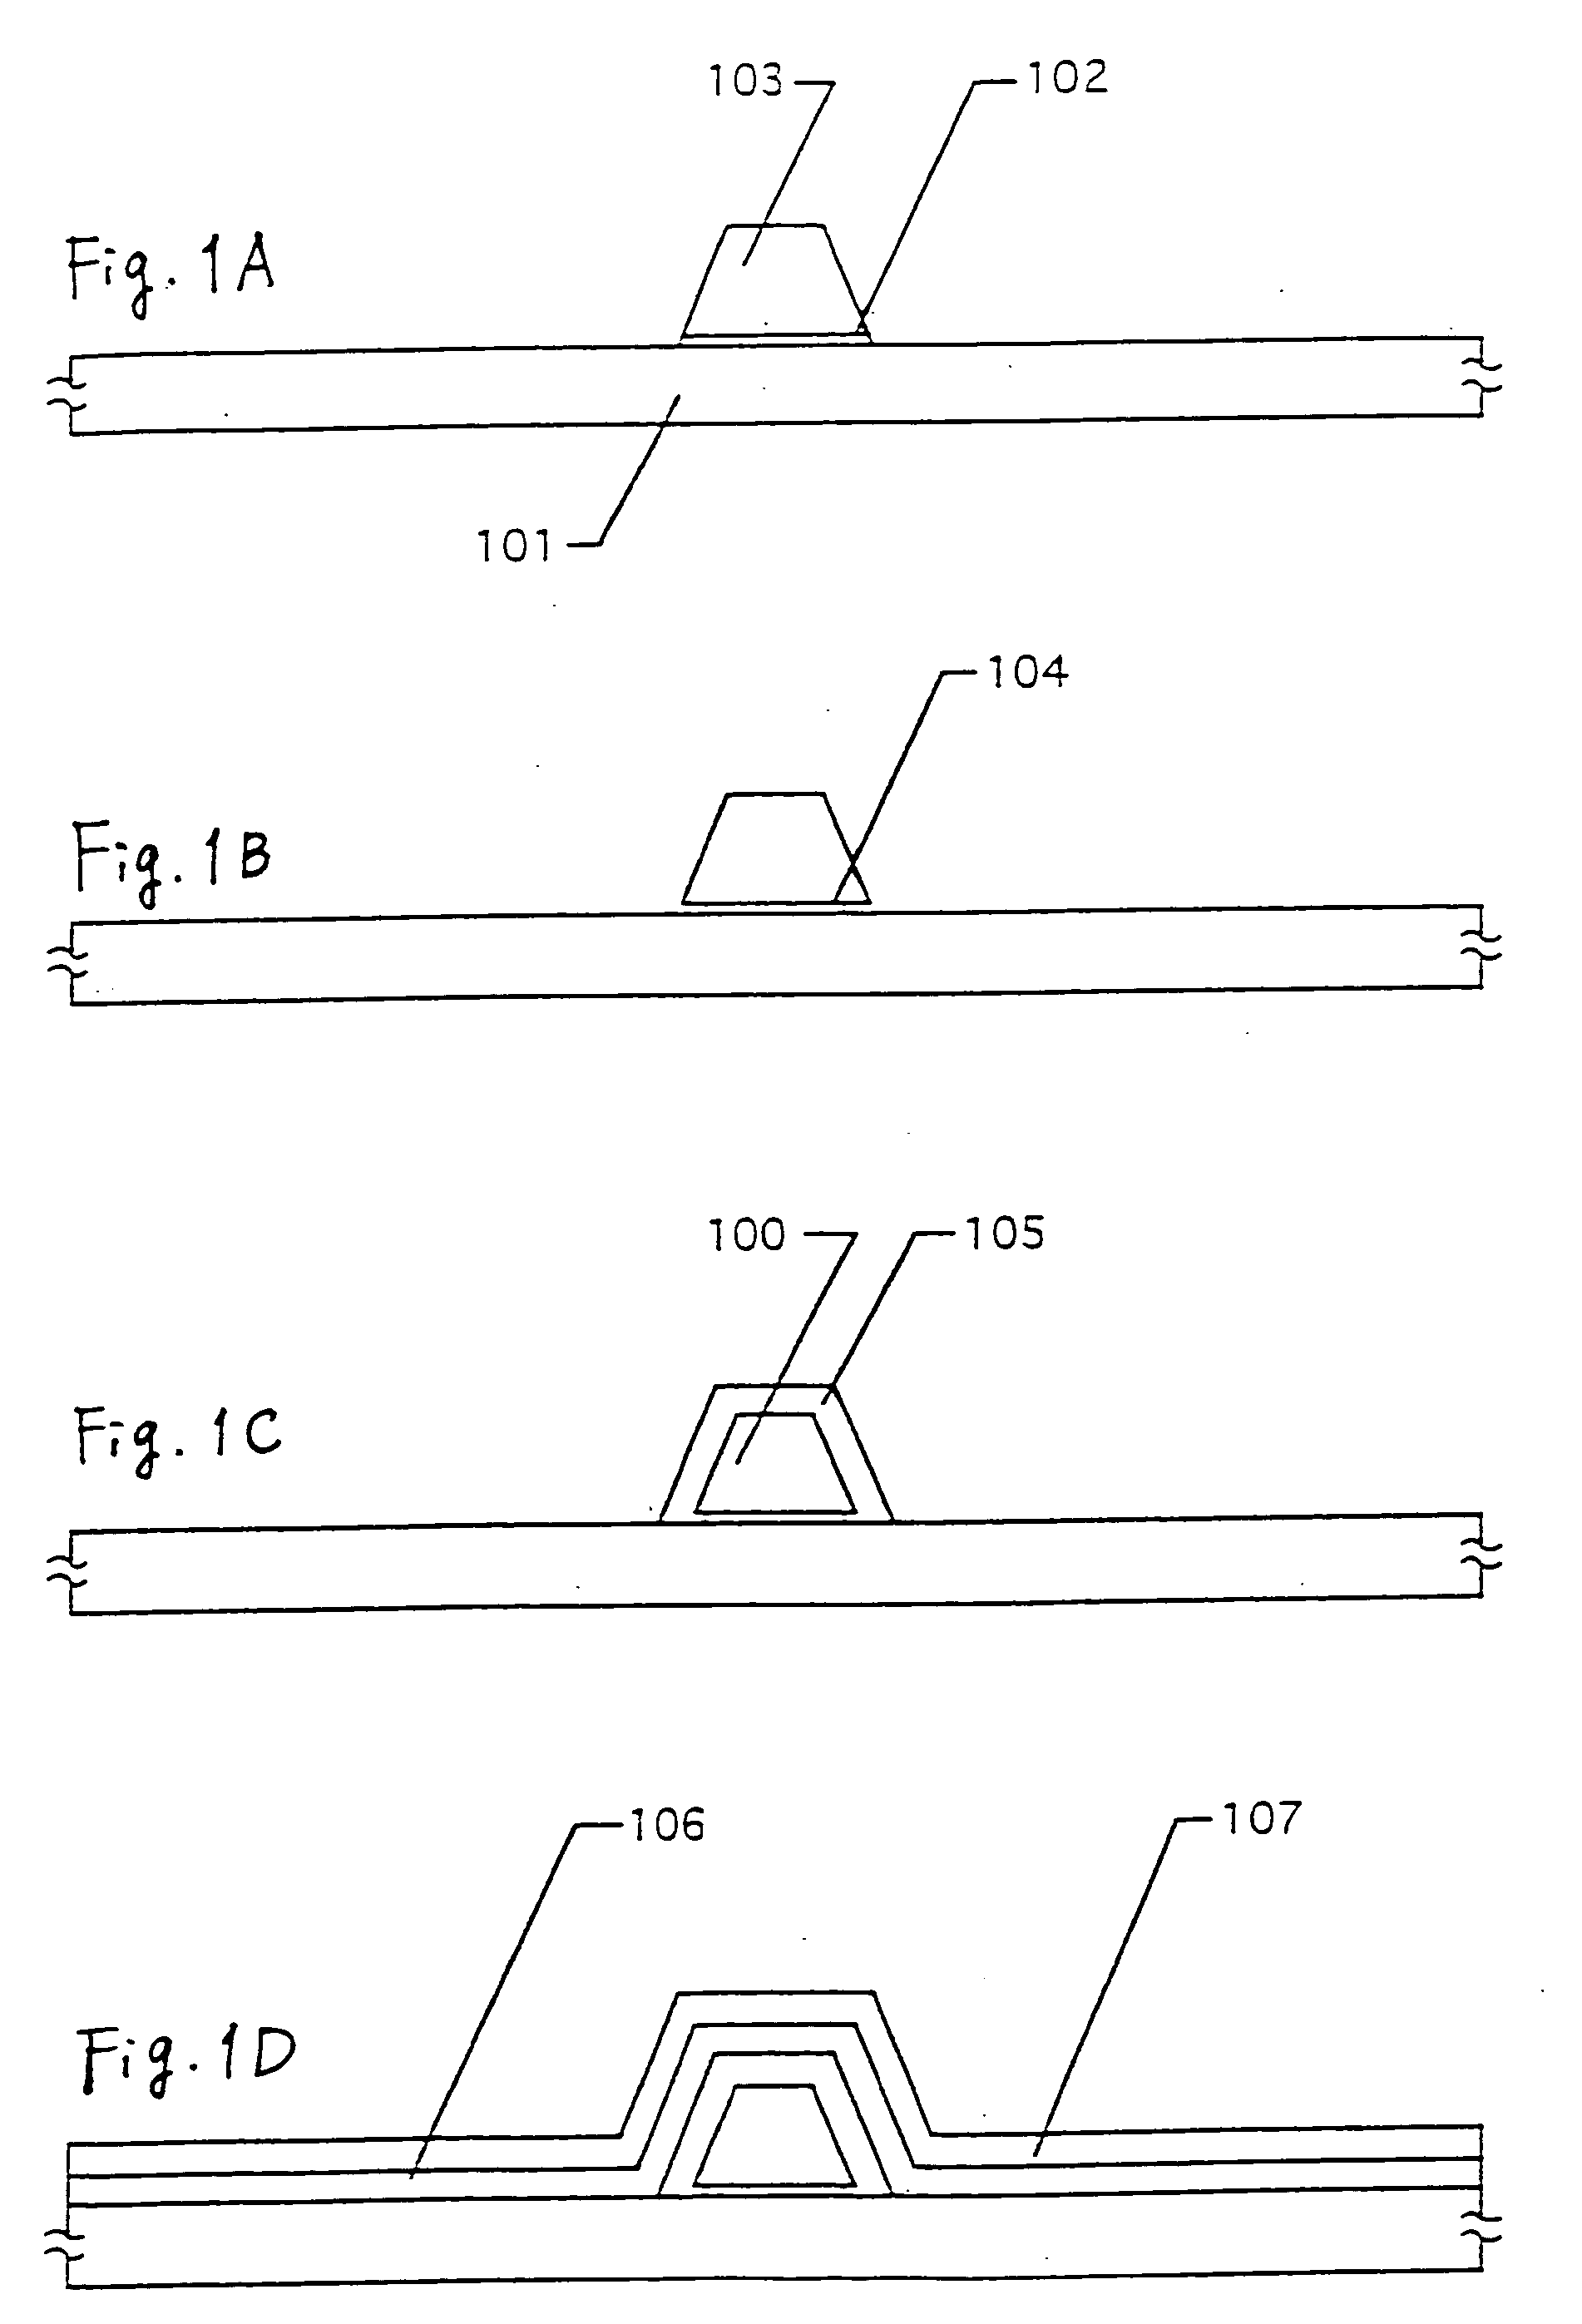 Semiconductor device and method for producing it